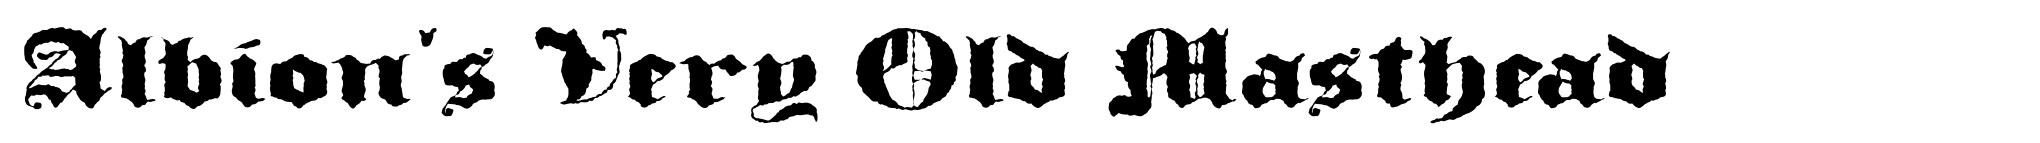 Albion's Very Old Masthead image